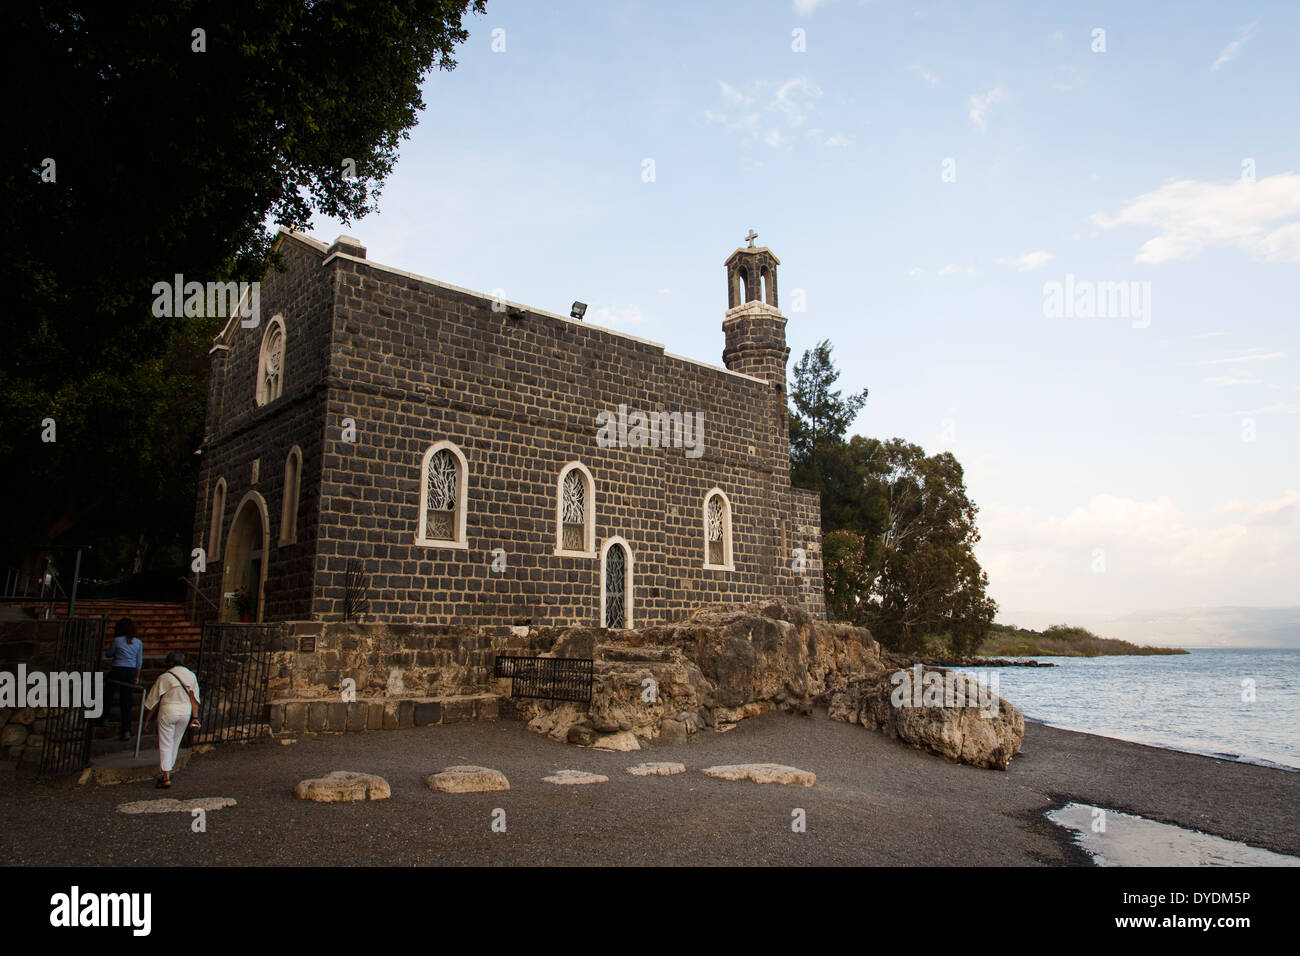 Church of the Primacy of St. Peter in Tabgha by the Sea of Galilee, Israel. Stock Photo